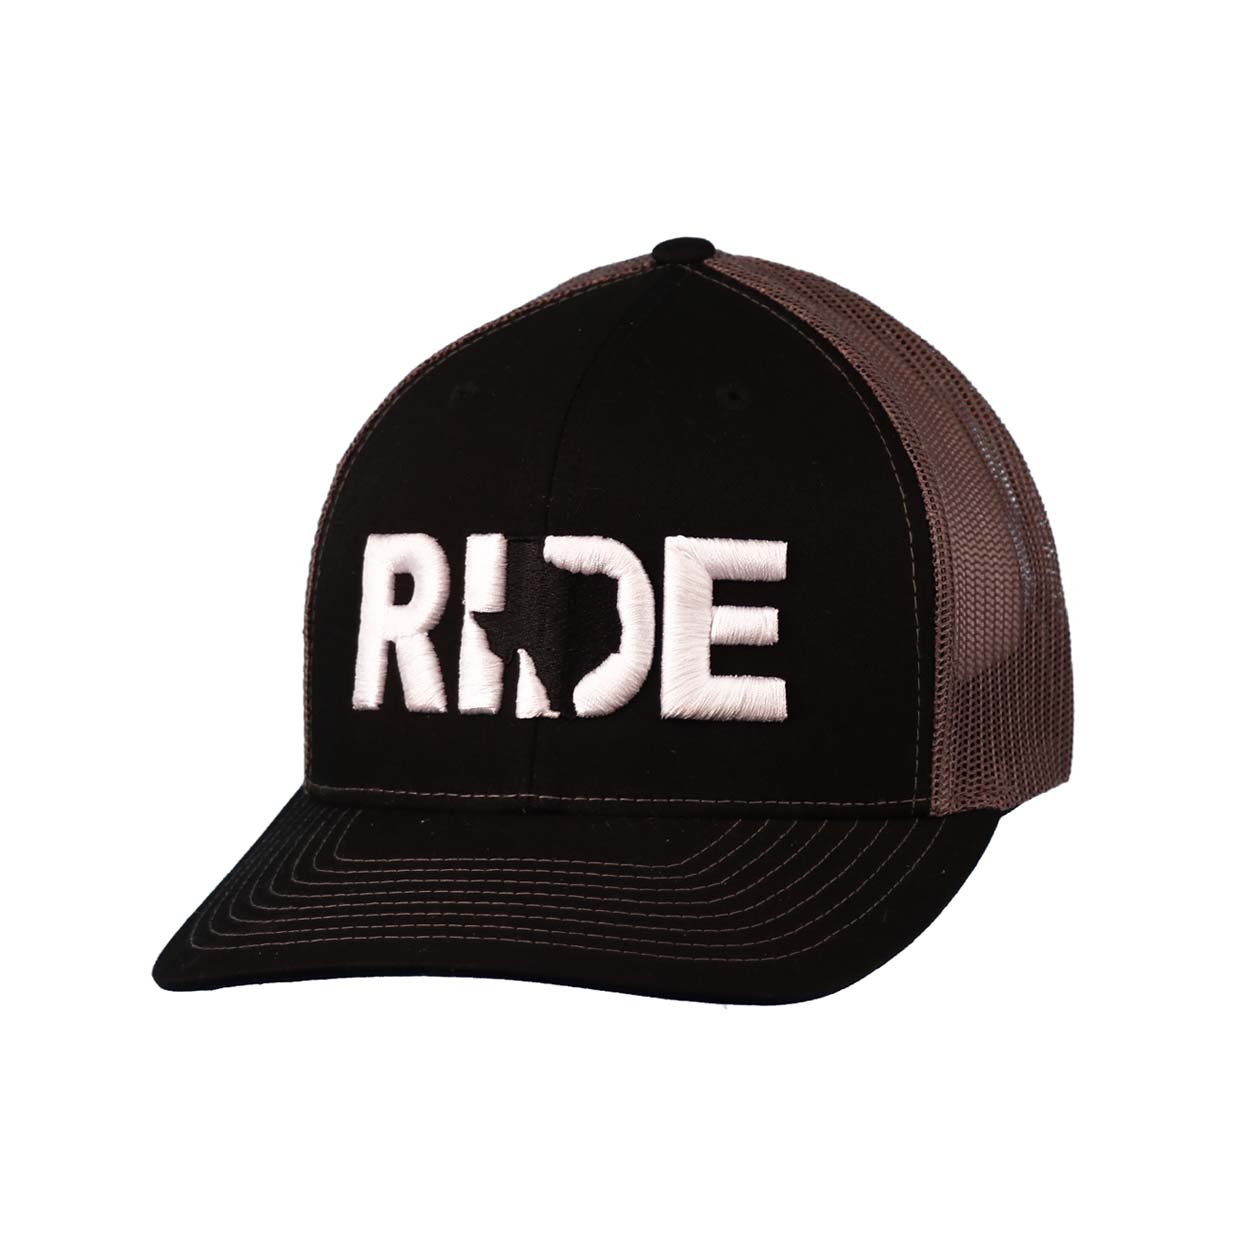 Ride Texas Classic Pro 3D Puff Embroidered Snapback Trucker Hat Black/Gray